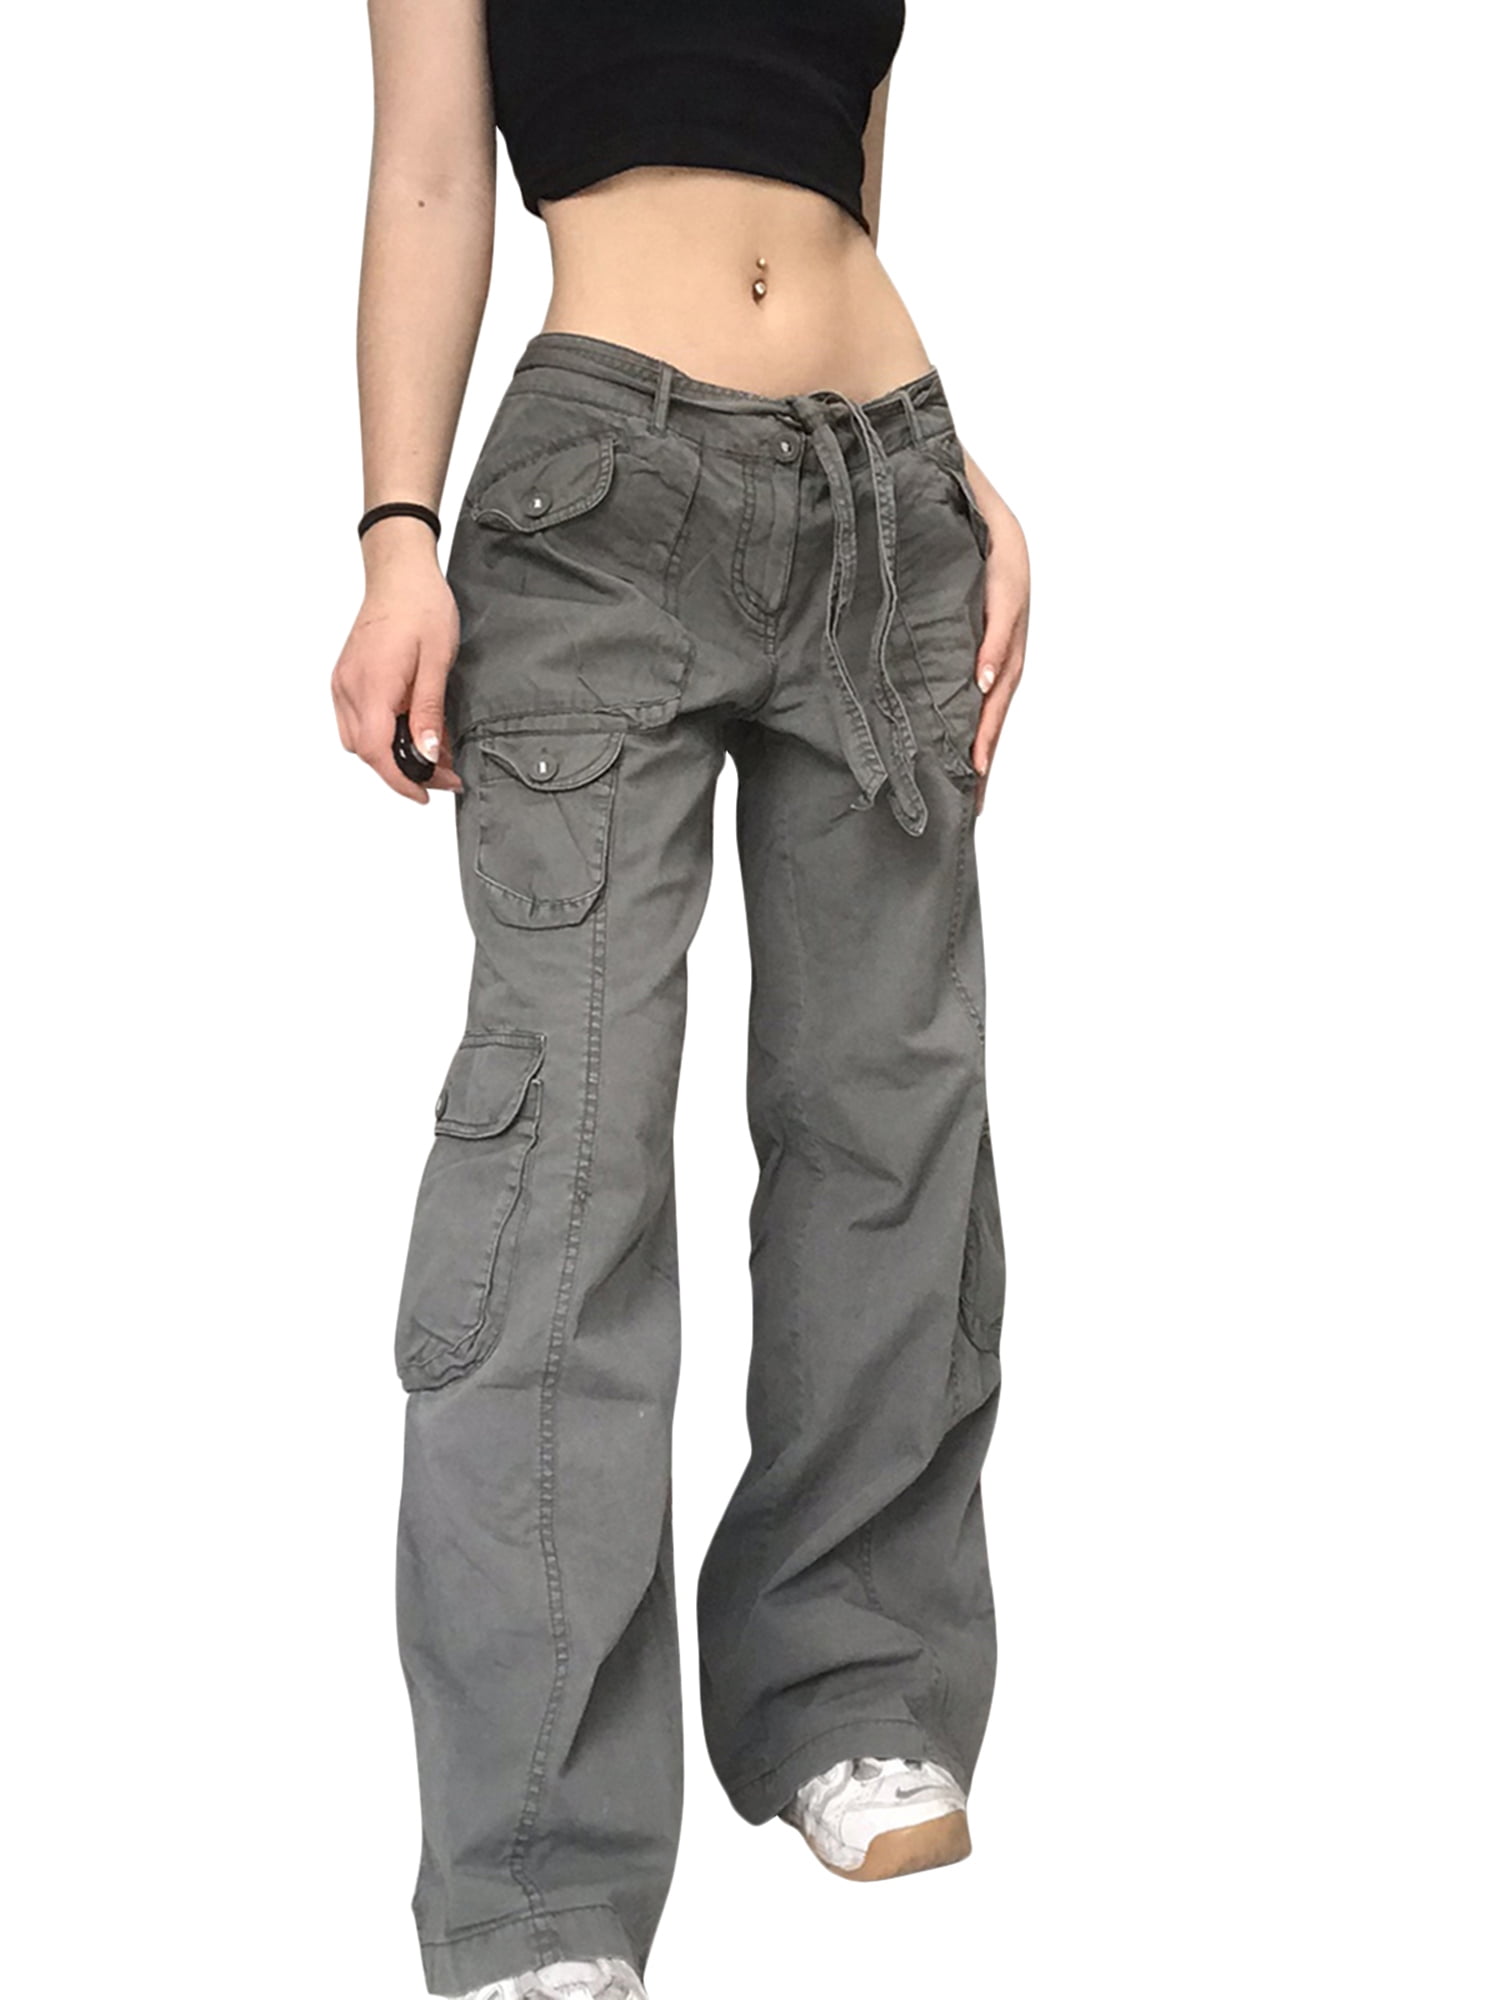 Buy Baggy 6 Pocket Cargo Jeans For Women/Girl Online @ ₹379 from ShopClues